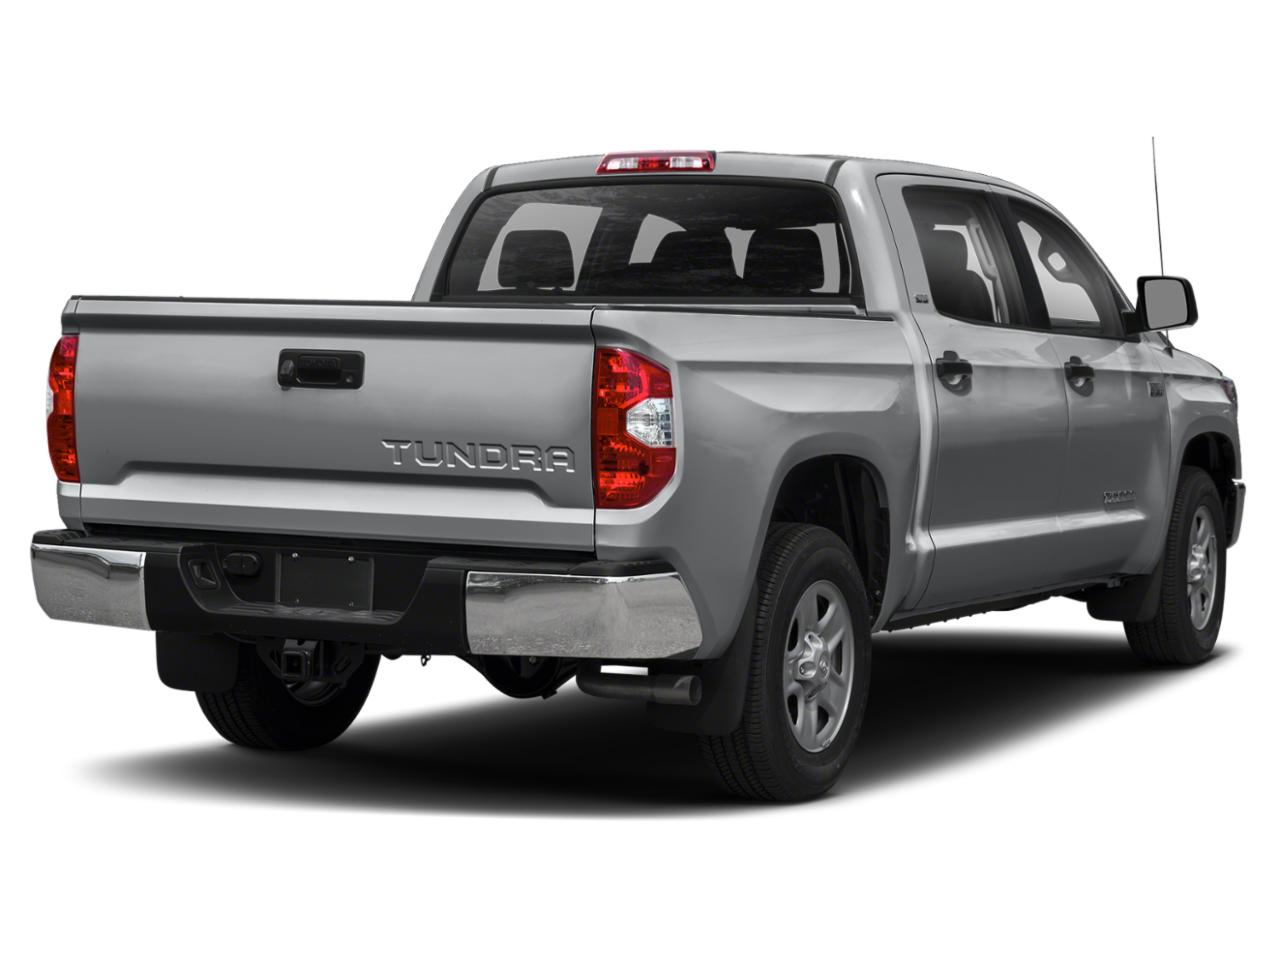 2019 Toyota Tundra 4WD Vehicle Photo in Pinellas Park , FL 33781